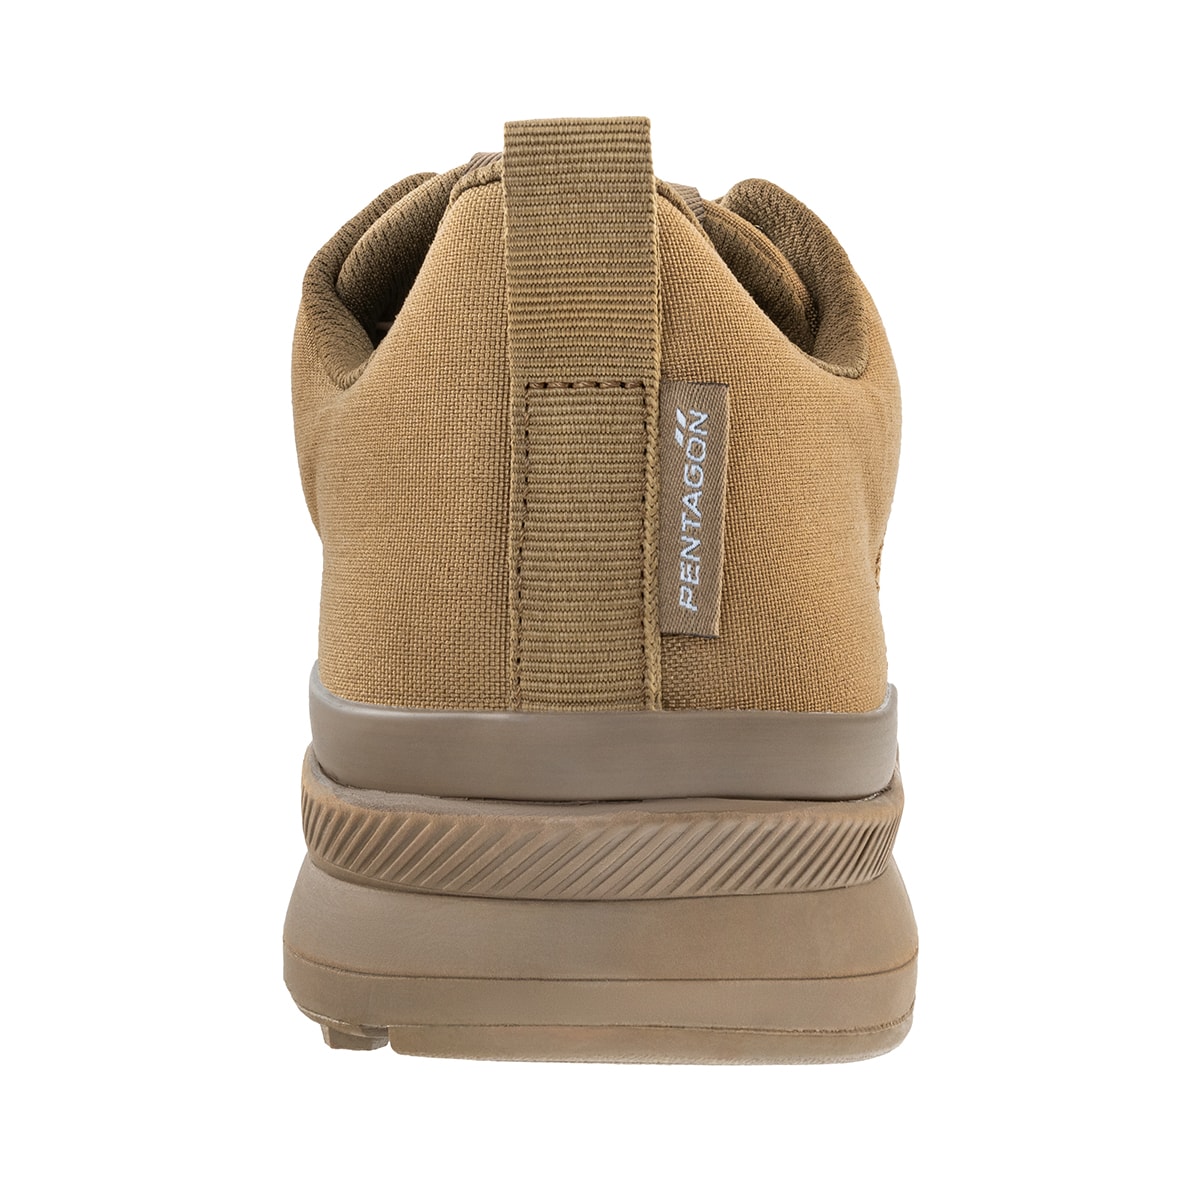 Buty Pentagon Hybrid Tactical Shoes 2.0 - Coyote